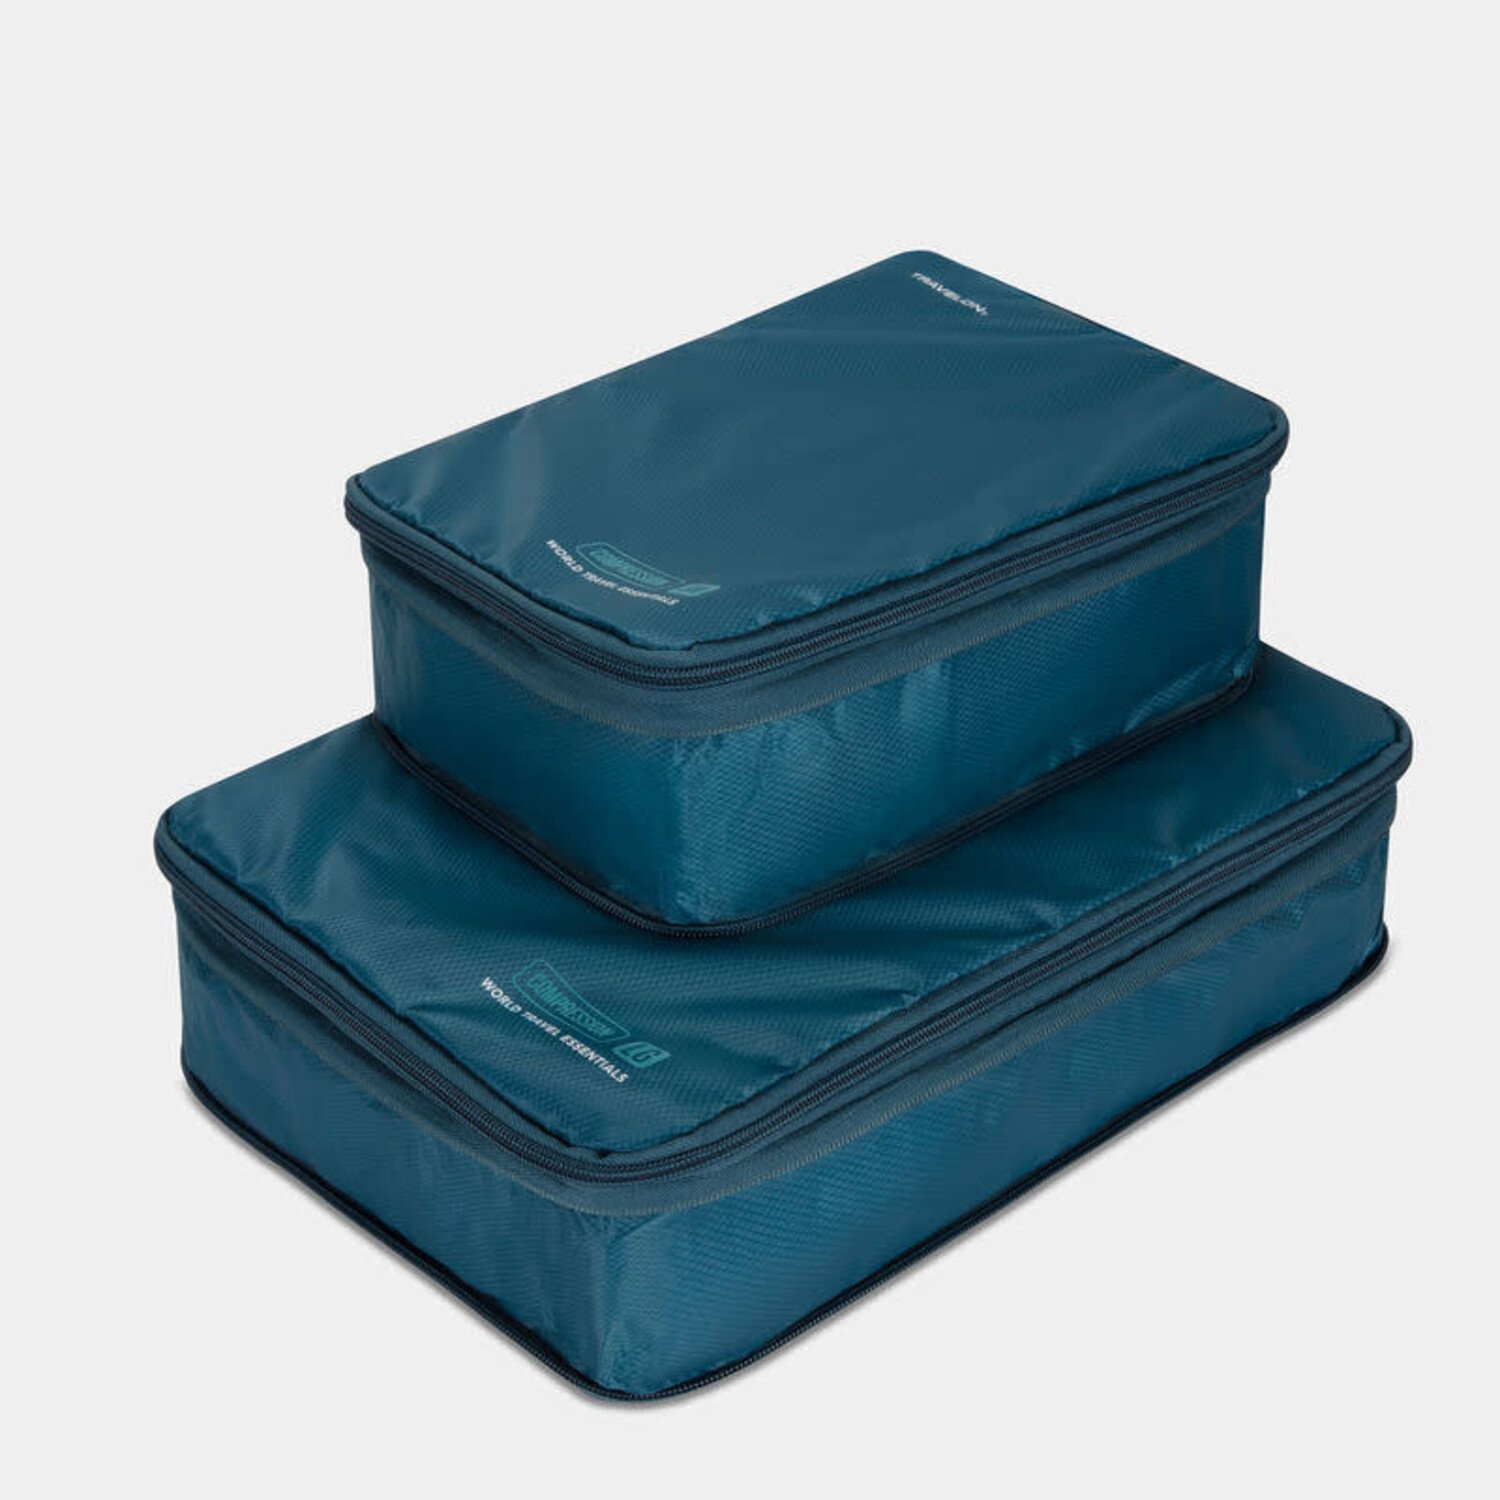 Travelon Set of 2 Compression Packing Cubes- Teal - Just Bags Luggage Center